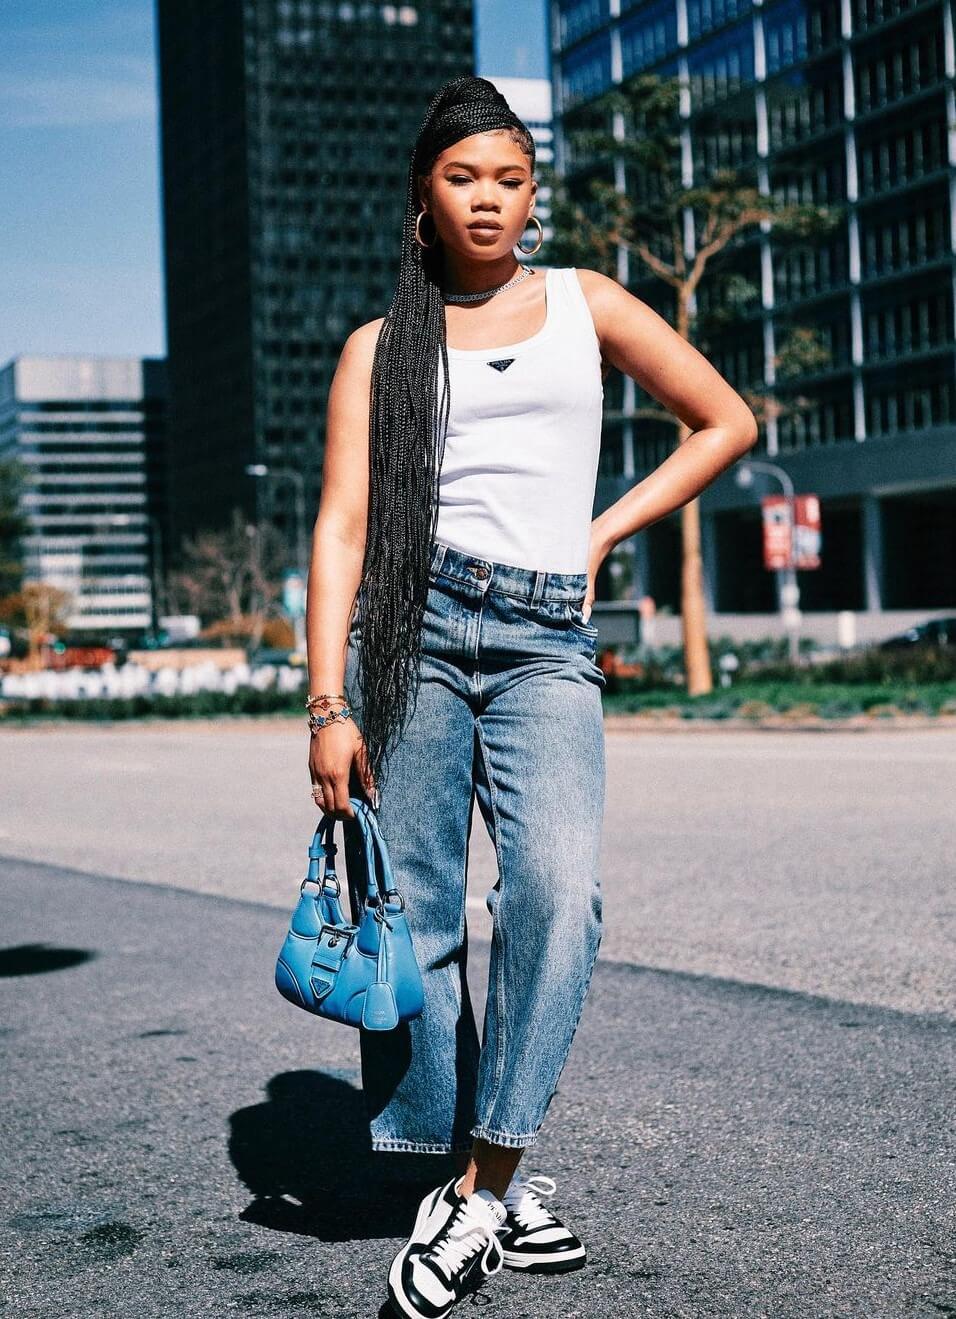 Storm Reid In White Sleeveless Top With Denim Bottoms